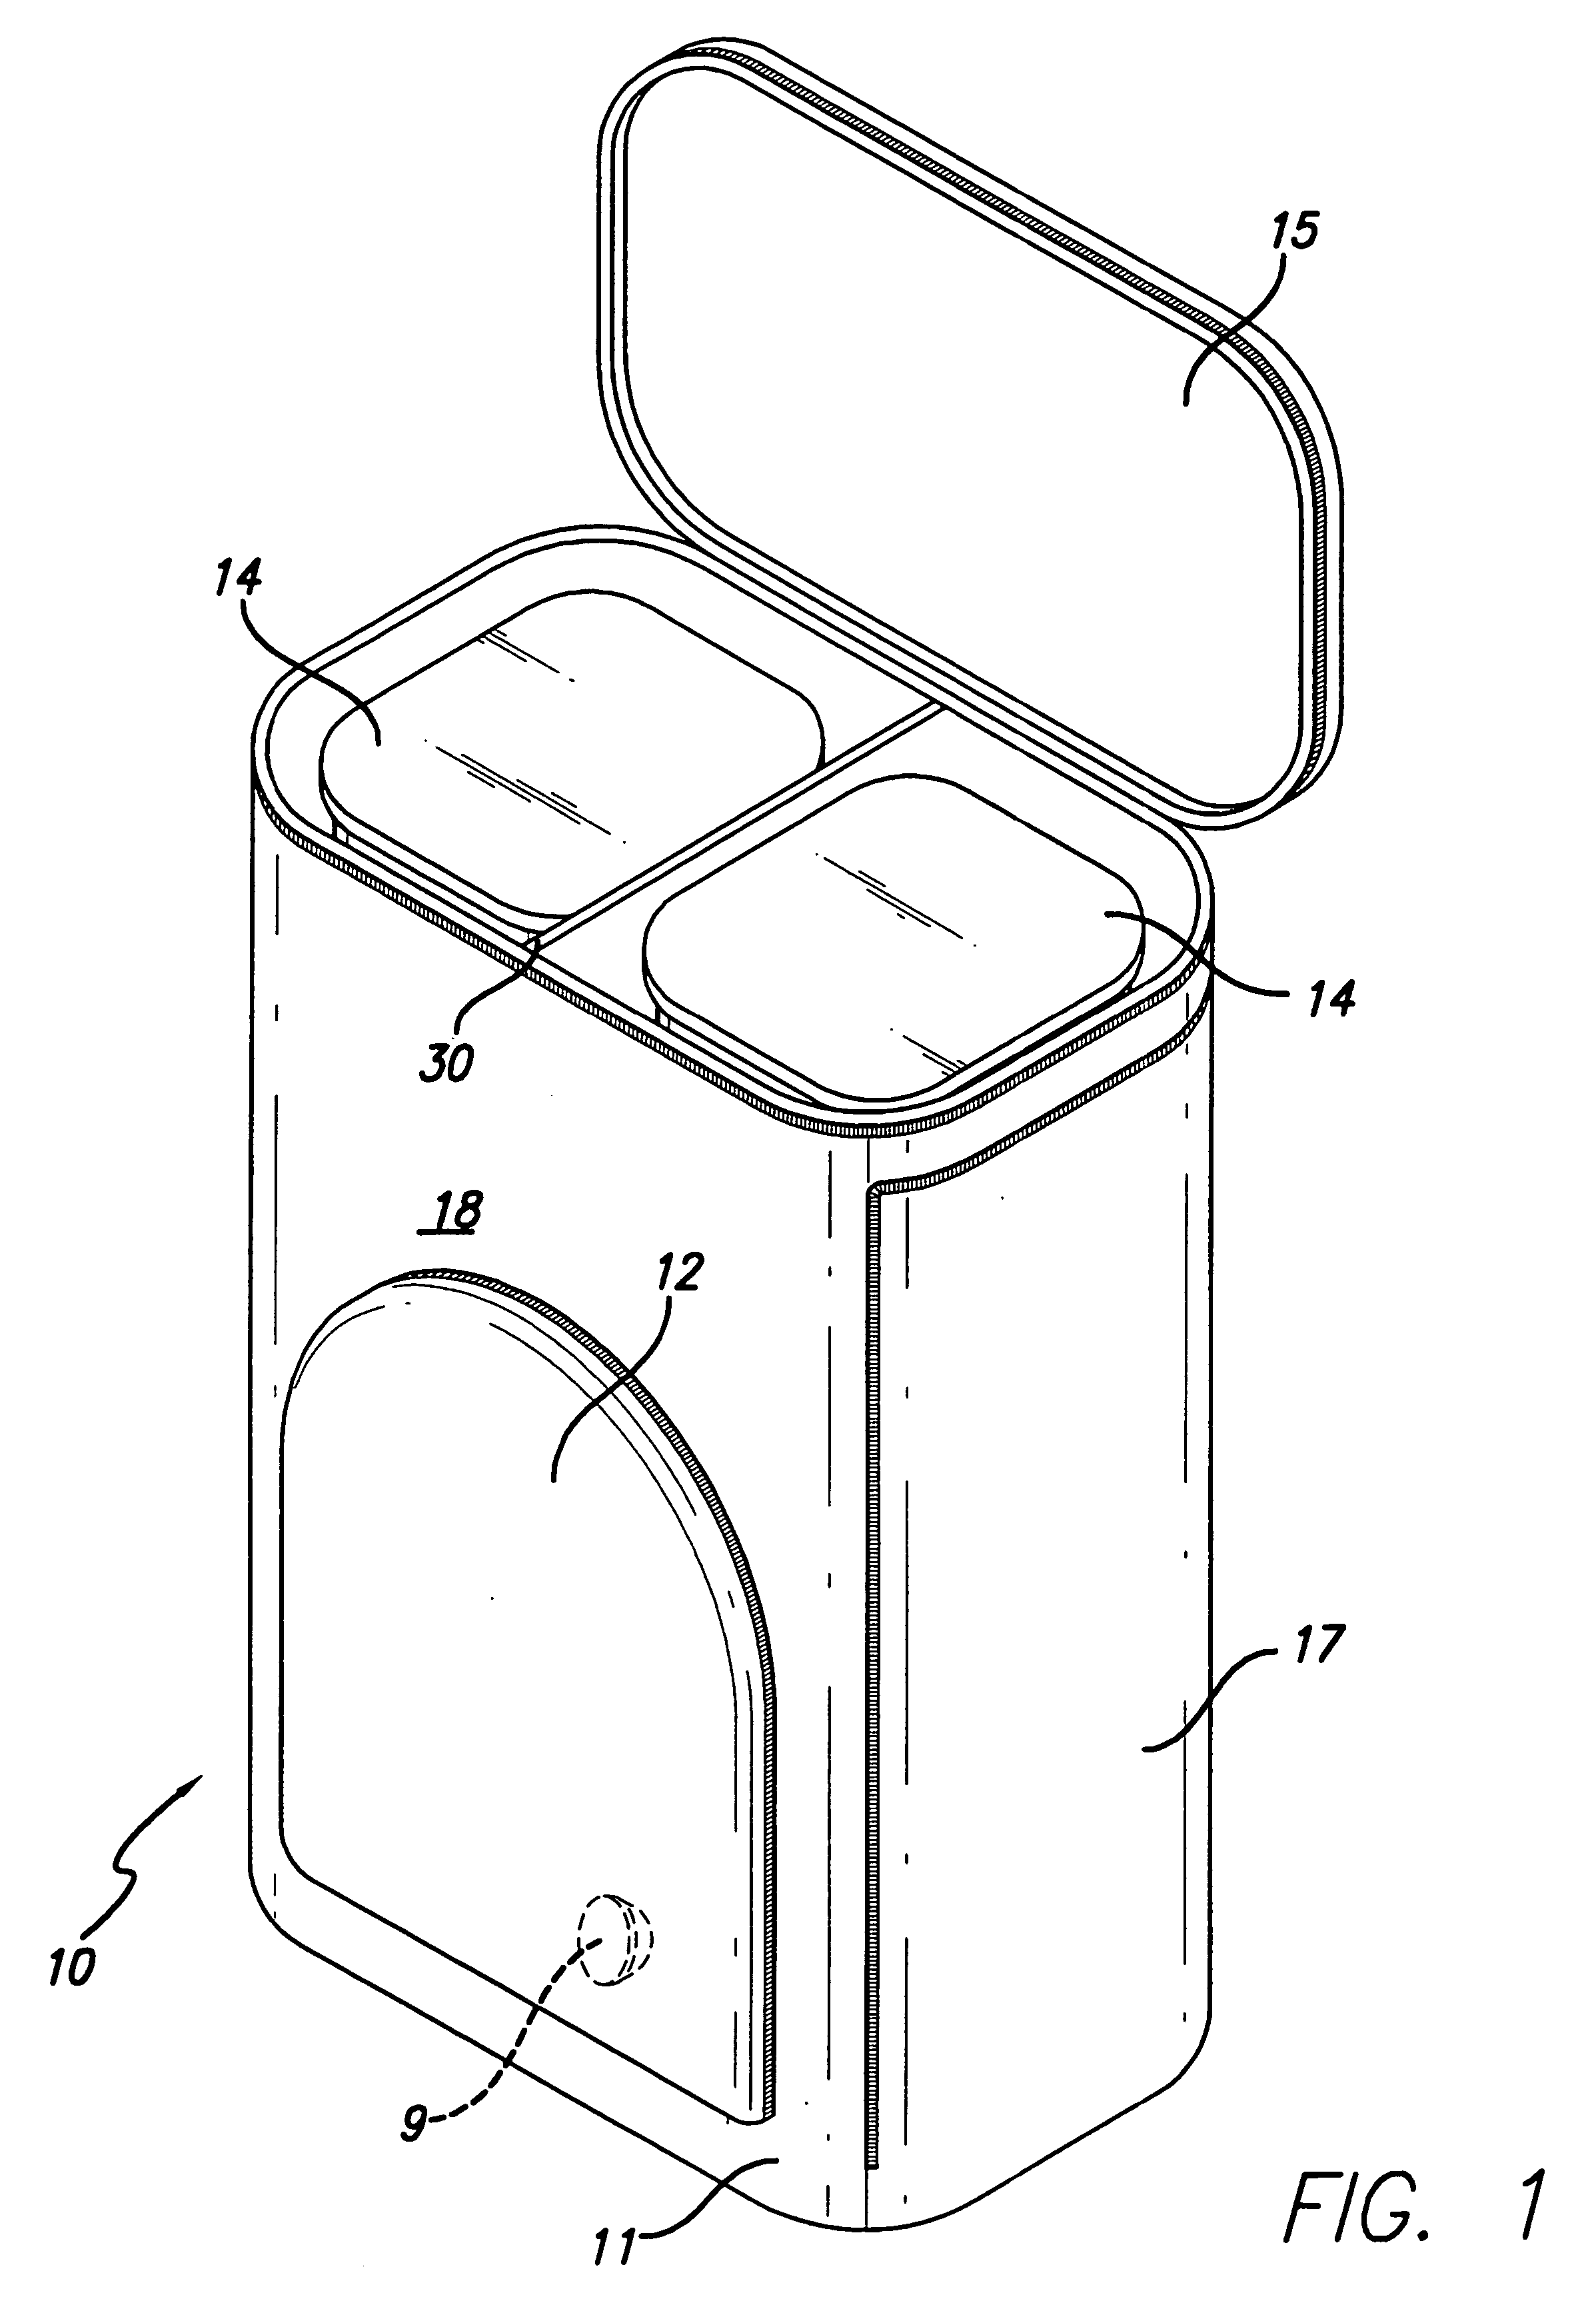 Modular apparatus with timer and method for nutrition system utilizing portions determined by the eater's weight